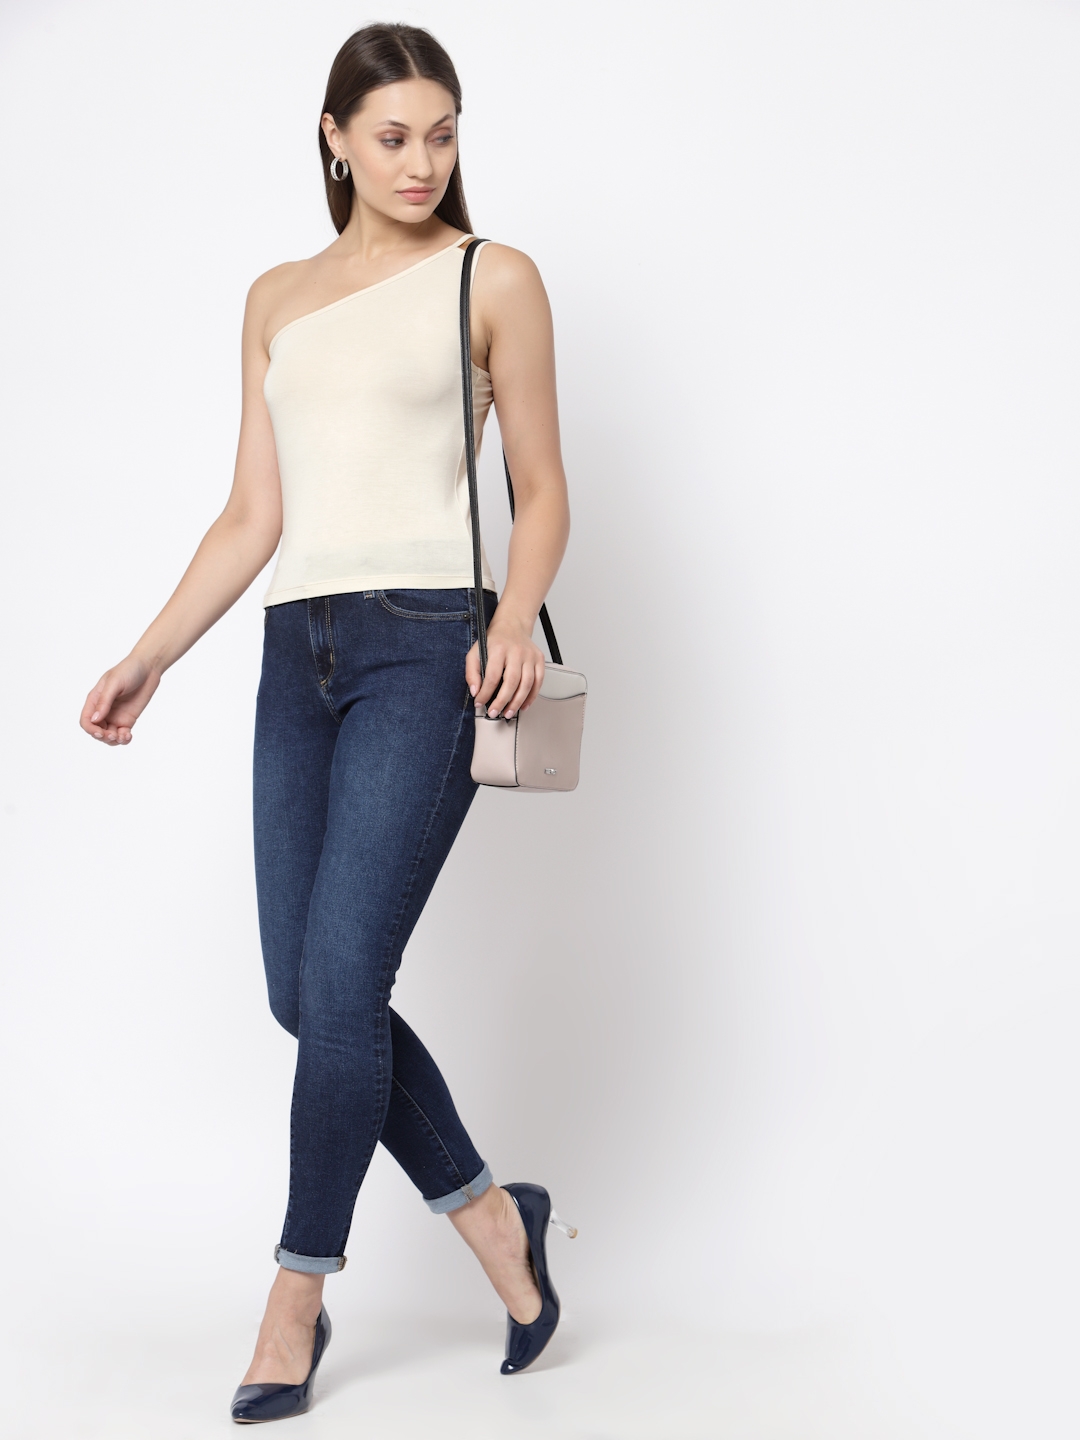 YOONOY | One Shoulder Stretchable top